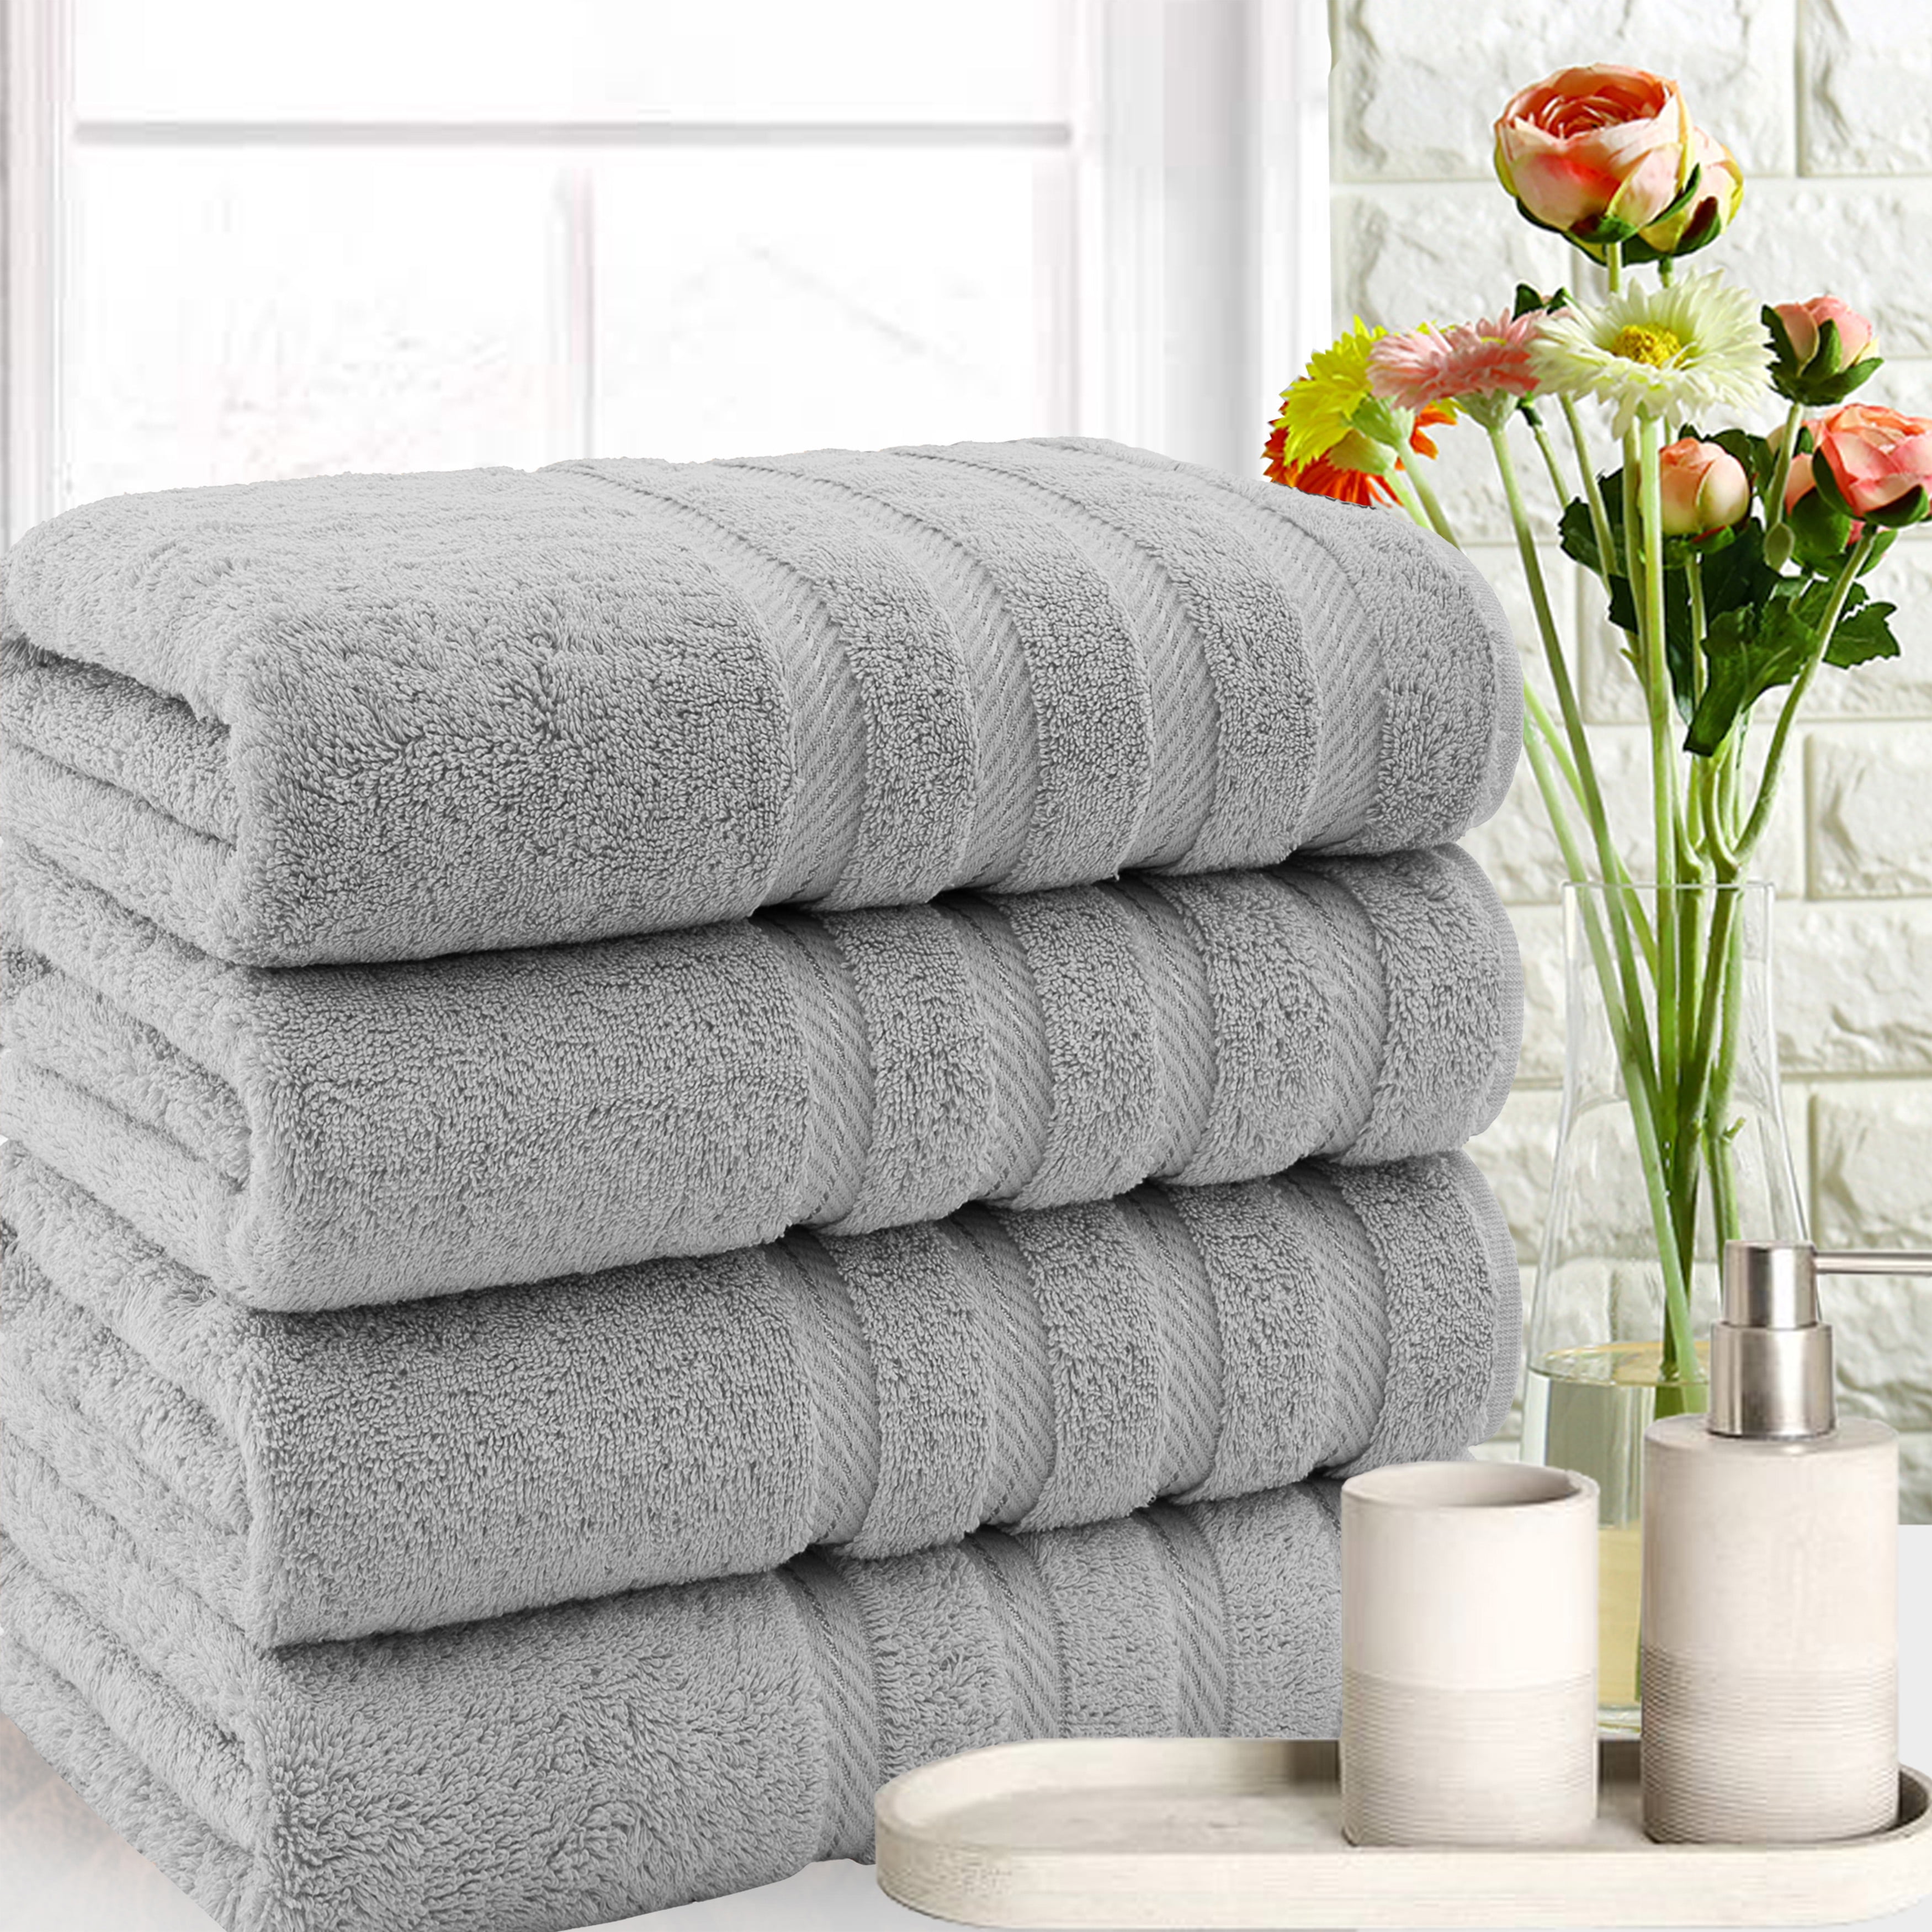  American Soft Linen 4 Piece Bath Towel Set, 100% Turkish Cotton Towels  for Bathroom, 27x54 in Extra Large Bath Towels, White : Home & Kitchen